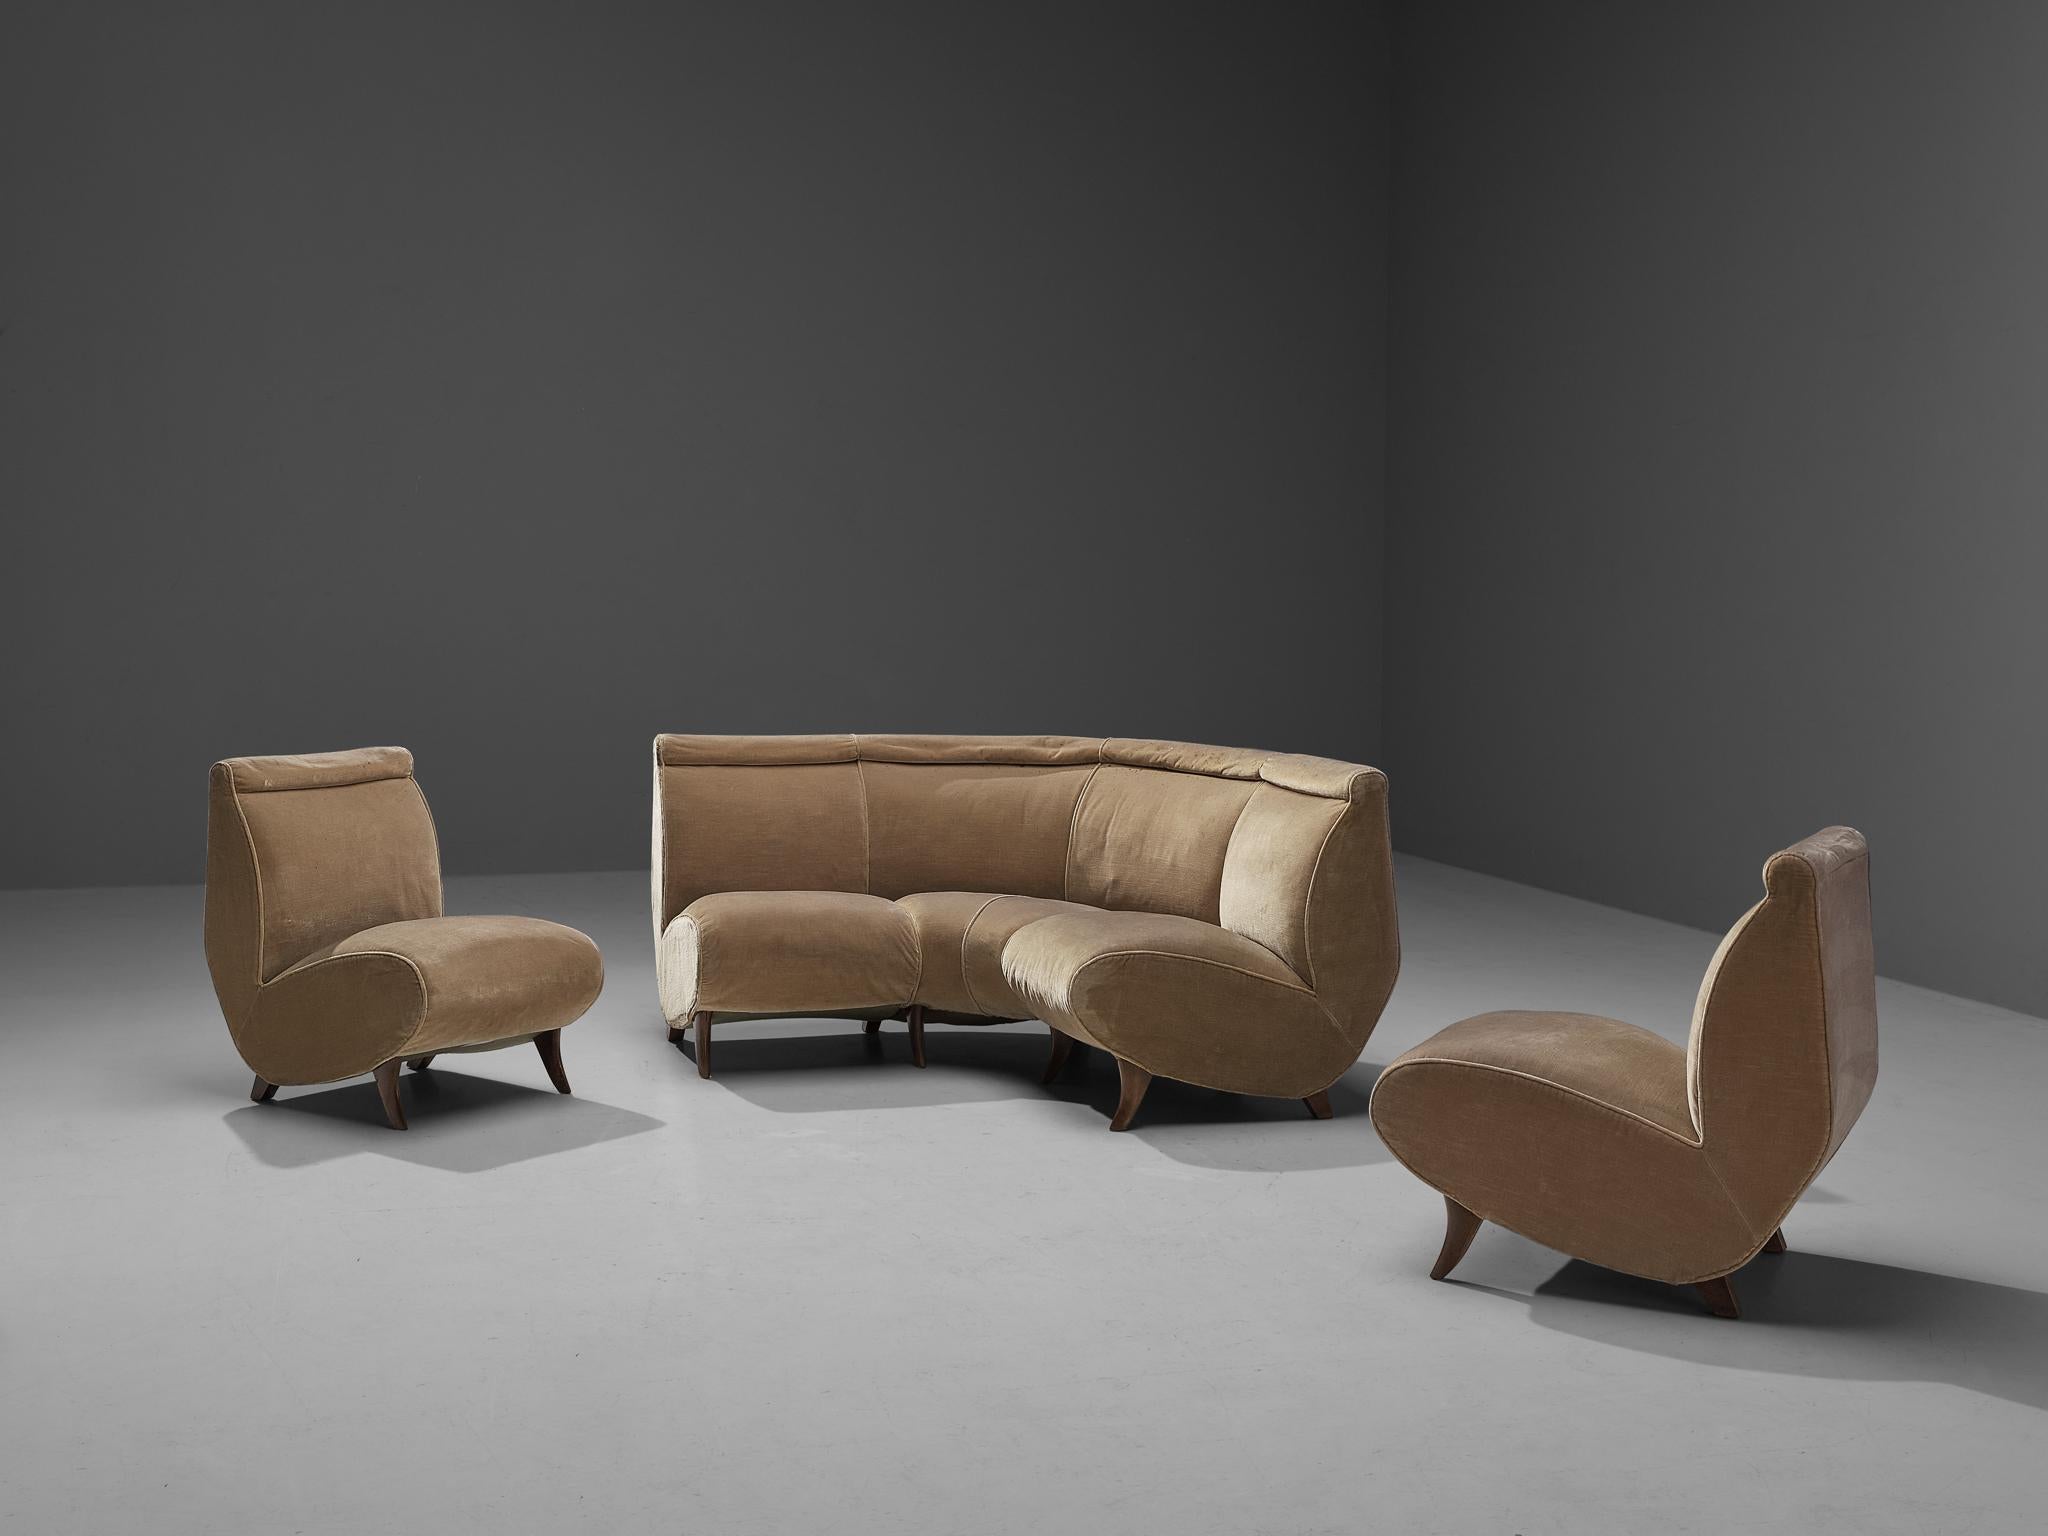 Modular sofa, velvet, beech, Italy, 1960s

This characteristic sofa of Italian origin finds itself at the intersection of art and design. This sofa is characterized by a splendid construction consisting of one right-angled sofa and two singular